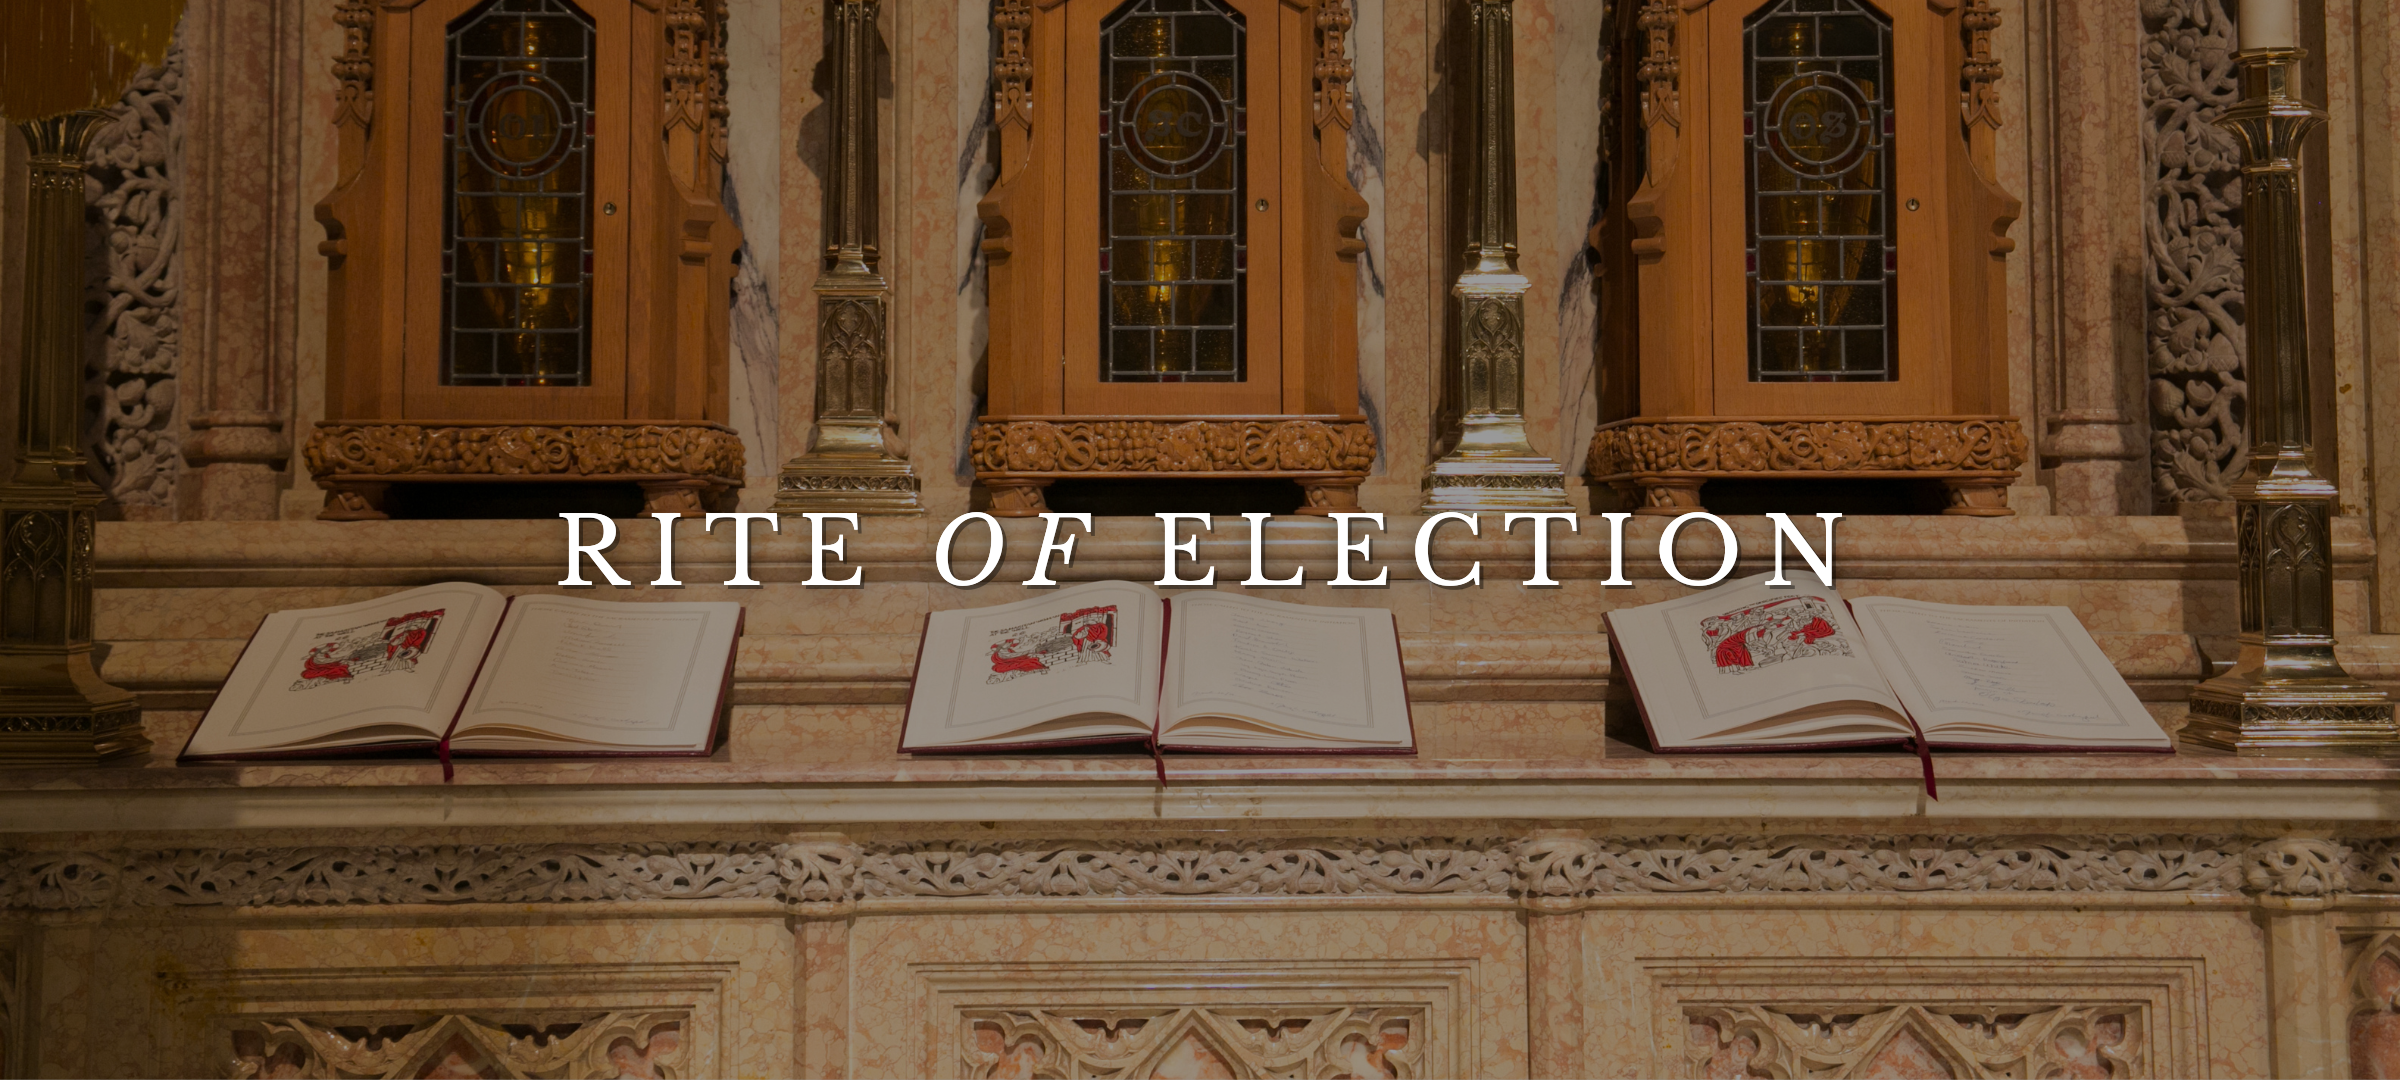 Heart to Heart: Rite of Election